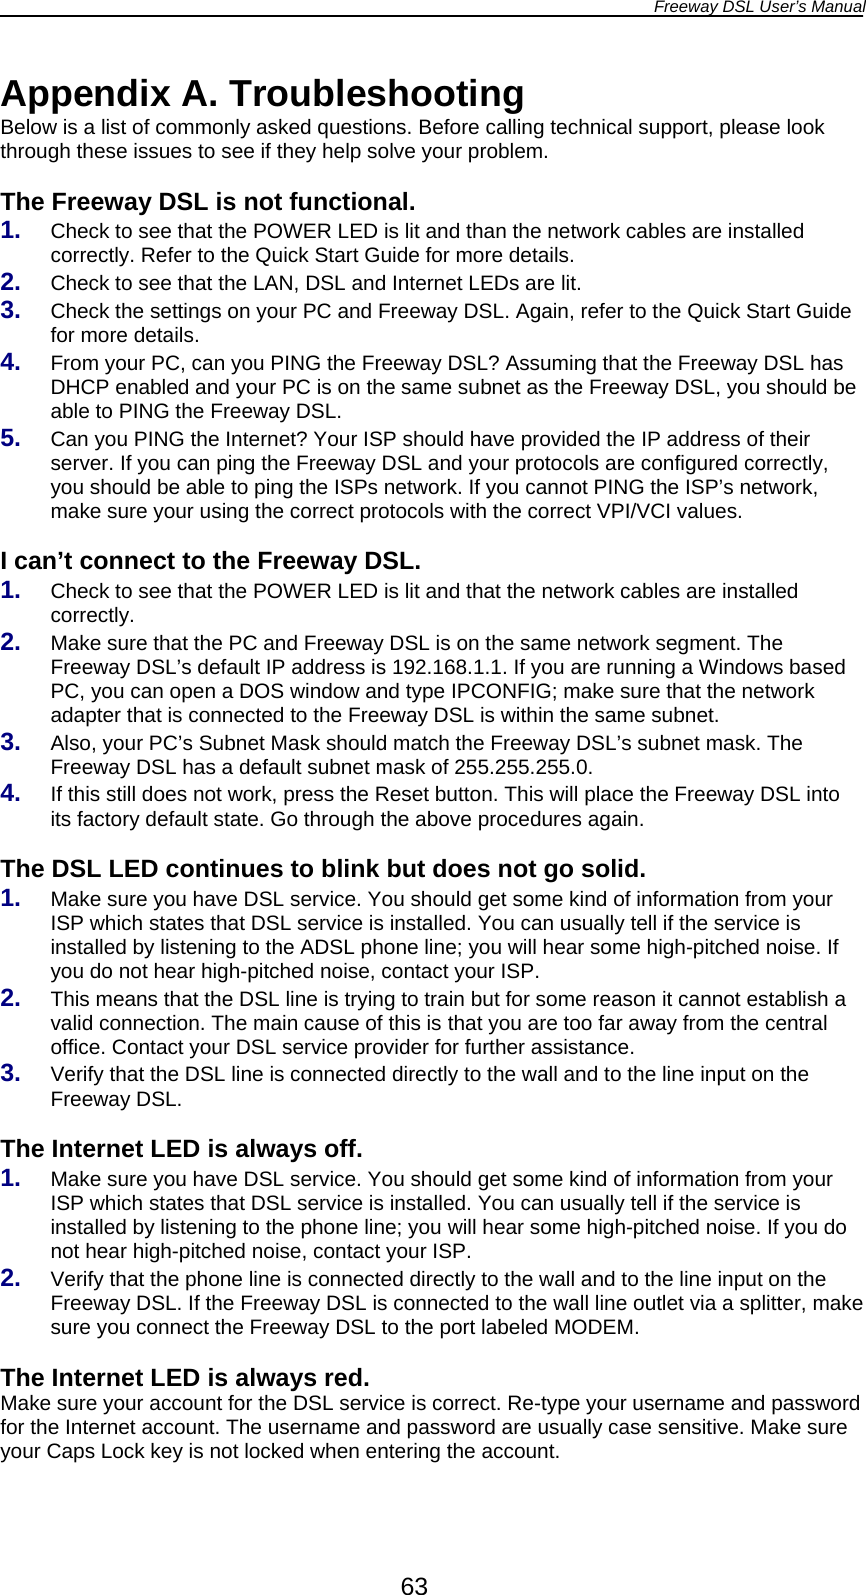 Freeway DSL User’s Manual  63 Appendix A. Troubleshooting Below is a list of commonly asked questions. Before calling technical support, please look through these issues to see if they help solve your problem.  The Freeway DSL is not functional. 1.  Check to see that the POWER LED is lit and than the network cables are installed correctly. Refer to the Quick Start Guide for more details. 2.  Check to see that the LAN, DSL and Internet LEDs are lit. 3.  Check the settings on your PC and Freeway DSL. Again, refer to the Quick Start Guide for more details. 4.  From your PC, can you PING the Freeway DSL? Assuming that the Freeway DSL has DHCP enabled and your PC is on the same subnet as the Freeway DSL, you should be able to PING the Freeway DSL. 5.  Can you PING the Internet? Your ISP should have provided the IP address of their server. If you can ping the Freeway DSL and your protocols are configured correctly, you should be able to ping the ISPs network. If you cannot PING the ISP’s network, make sure your using the correct protocols with the correct VPI/VCI values.  I can’t connect to the Freeway DSL. 1.  Check to see that the POWER LED is lit and that the network cables are installed correctly. 2.  Make sure that the PC and Freeway DSL is on the same network segment. The Freeway DSL’s default IP address is 192.168.1.1. If you are running a Windows based PC, you can open a DOS window and type IPCONFIG; make sure that the network adapter that is connected to the Freeway DSL is within the same subnet. 3.  Also, your PC’s Subnet Mask should match the Freeway DSL’s subnet mask. The Freeway DSL has a default subnet mask of 255.255.255.0. 4.  If this still does not work, press the Reset button. This will place the Freeway DSL into its factory default state. Go through the above procedures again.  The DSL LED continues to blink but does not go solid. 1.  Make sure you have DSL service. You should get some kind of information from your ISP which states that DSL service is installed. You can usually tell if the service is installed by listening to the ADSL phone line; you will hear some high-pitched noise. If you do not hear high-pitched noise, contact your ISP. 2.  This means that the DSL line is trying to train but for some reason it cannot establish a valid connection. The main cause of this is that you are too far away from the central office. Contact your DSL service provider for further assistance. 3.  Verify that the DSL line is connected directly to the wall and to the line input on the Freeway DSL.  The Internet LED is always off. 1.  Make sure you have DSL service. You should get some kind of information from your ISP which states that DSL service is installed. You can usually tell if the service is installed by listening to the phone line; you will hear some high-pitched noise. If you do not hear high-pitched noise, contact your ISP. 2.  Verify that the phone line is connected directly to the wall and to the line input on the Freeway DSL. If the Freeway DSL is connected to the wall line outlet via a splitter, make sure you connect the Freeway DSL to the port labeled MODEM.  The Internet LED is always red. Make sure your account for the DSL service is correct. Re-type your username and password for the Internet account. The username and password are usually case sensitive. Make sure your Caps Lock key is not locked when entering the account.  